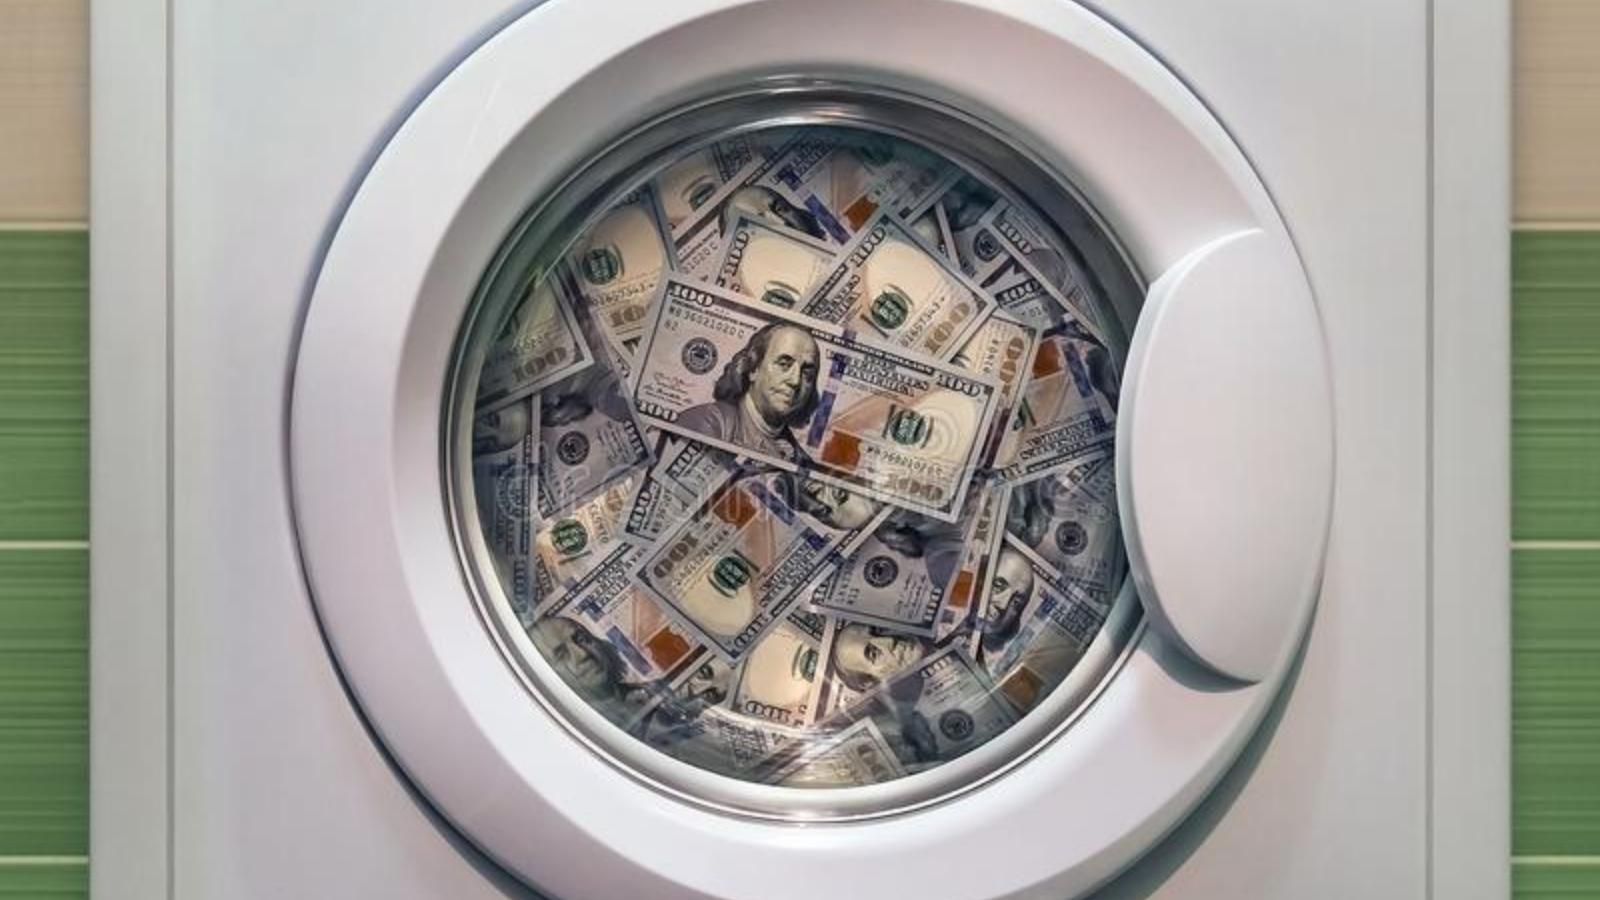 Save Money Get Rid of Your Dryers